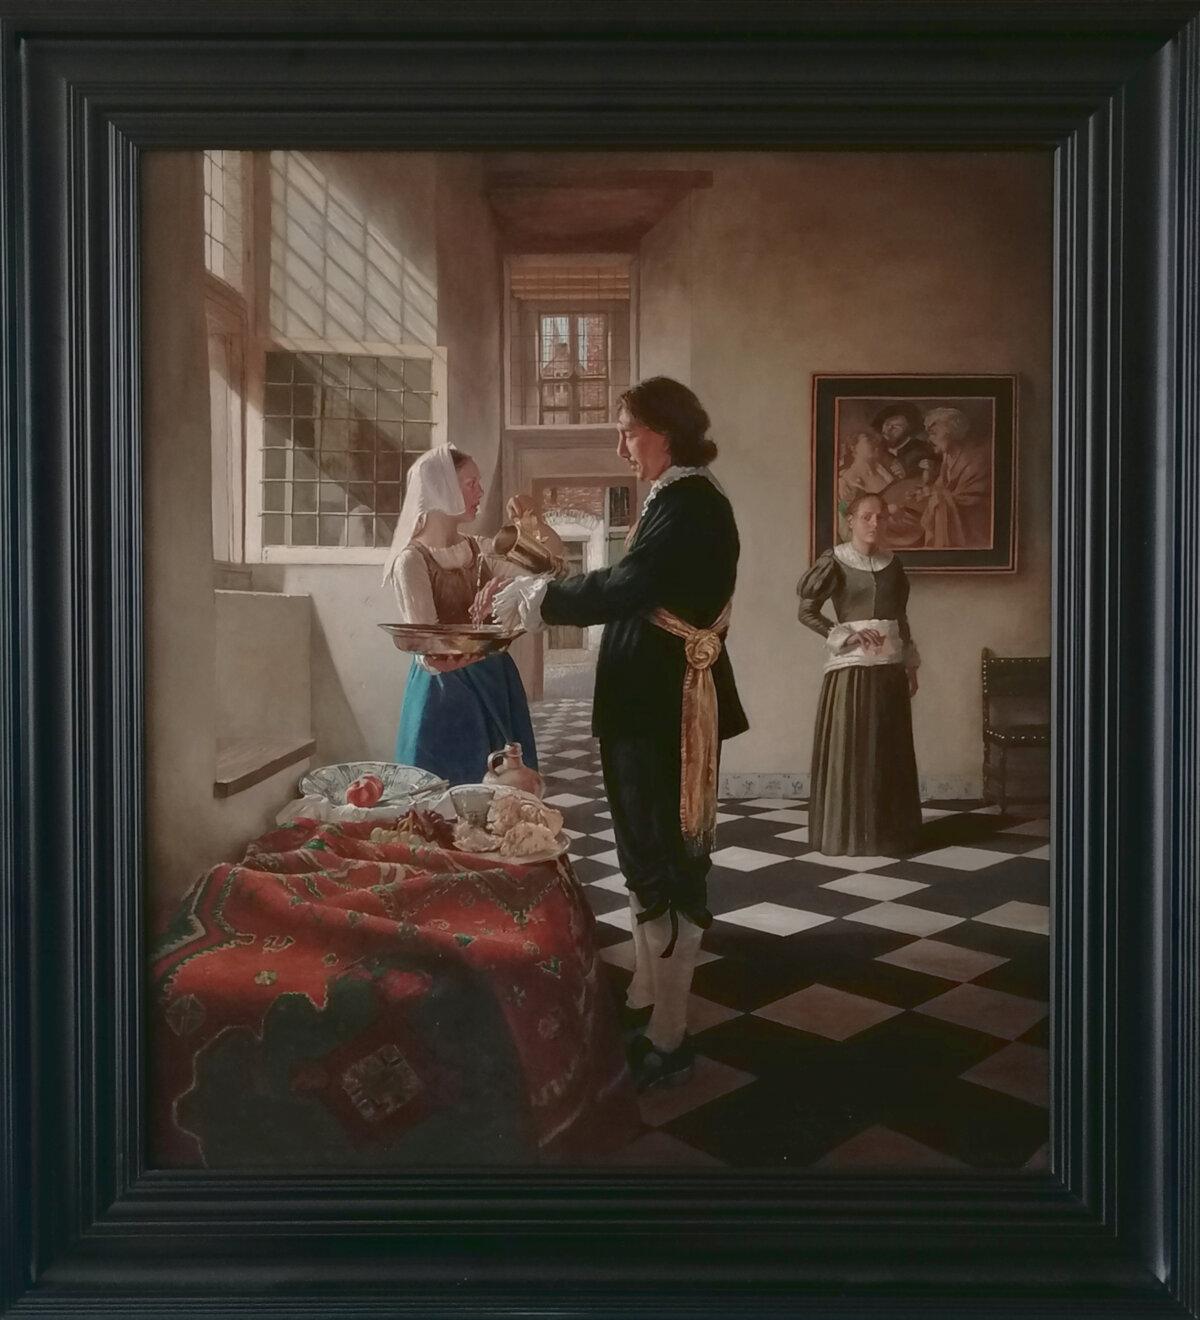 Last year, Nard Kwast appeared in “The New Vermeer,” a Dutch television show in which artists were challenged to create Johannes Vermeer’s lost works, known only by short descriptions. In the first episode, his painting “The Seigneur Washing His Hands” won and went on display in the Mauritshuis in The Hague. Oil on canvas; 29 1/2 inches by 25 5/8 inches. (Courtesy of Nard Kwast)